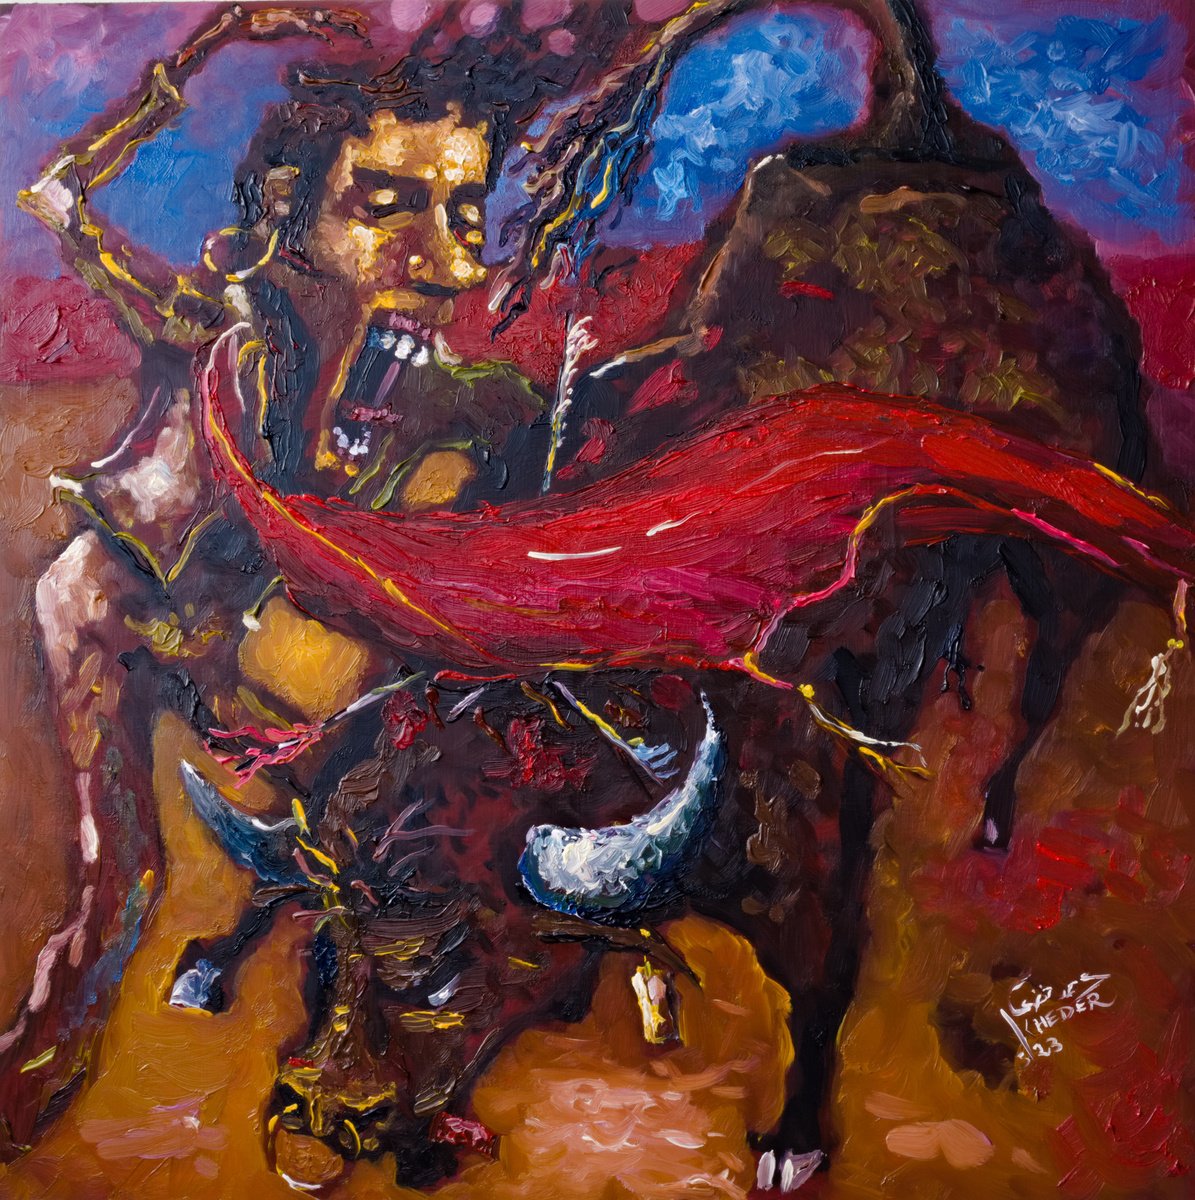 Bull Fighter by Kheder